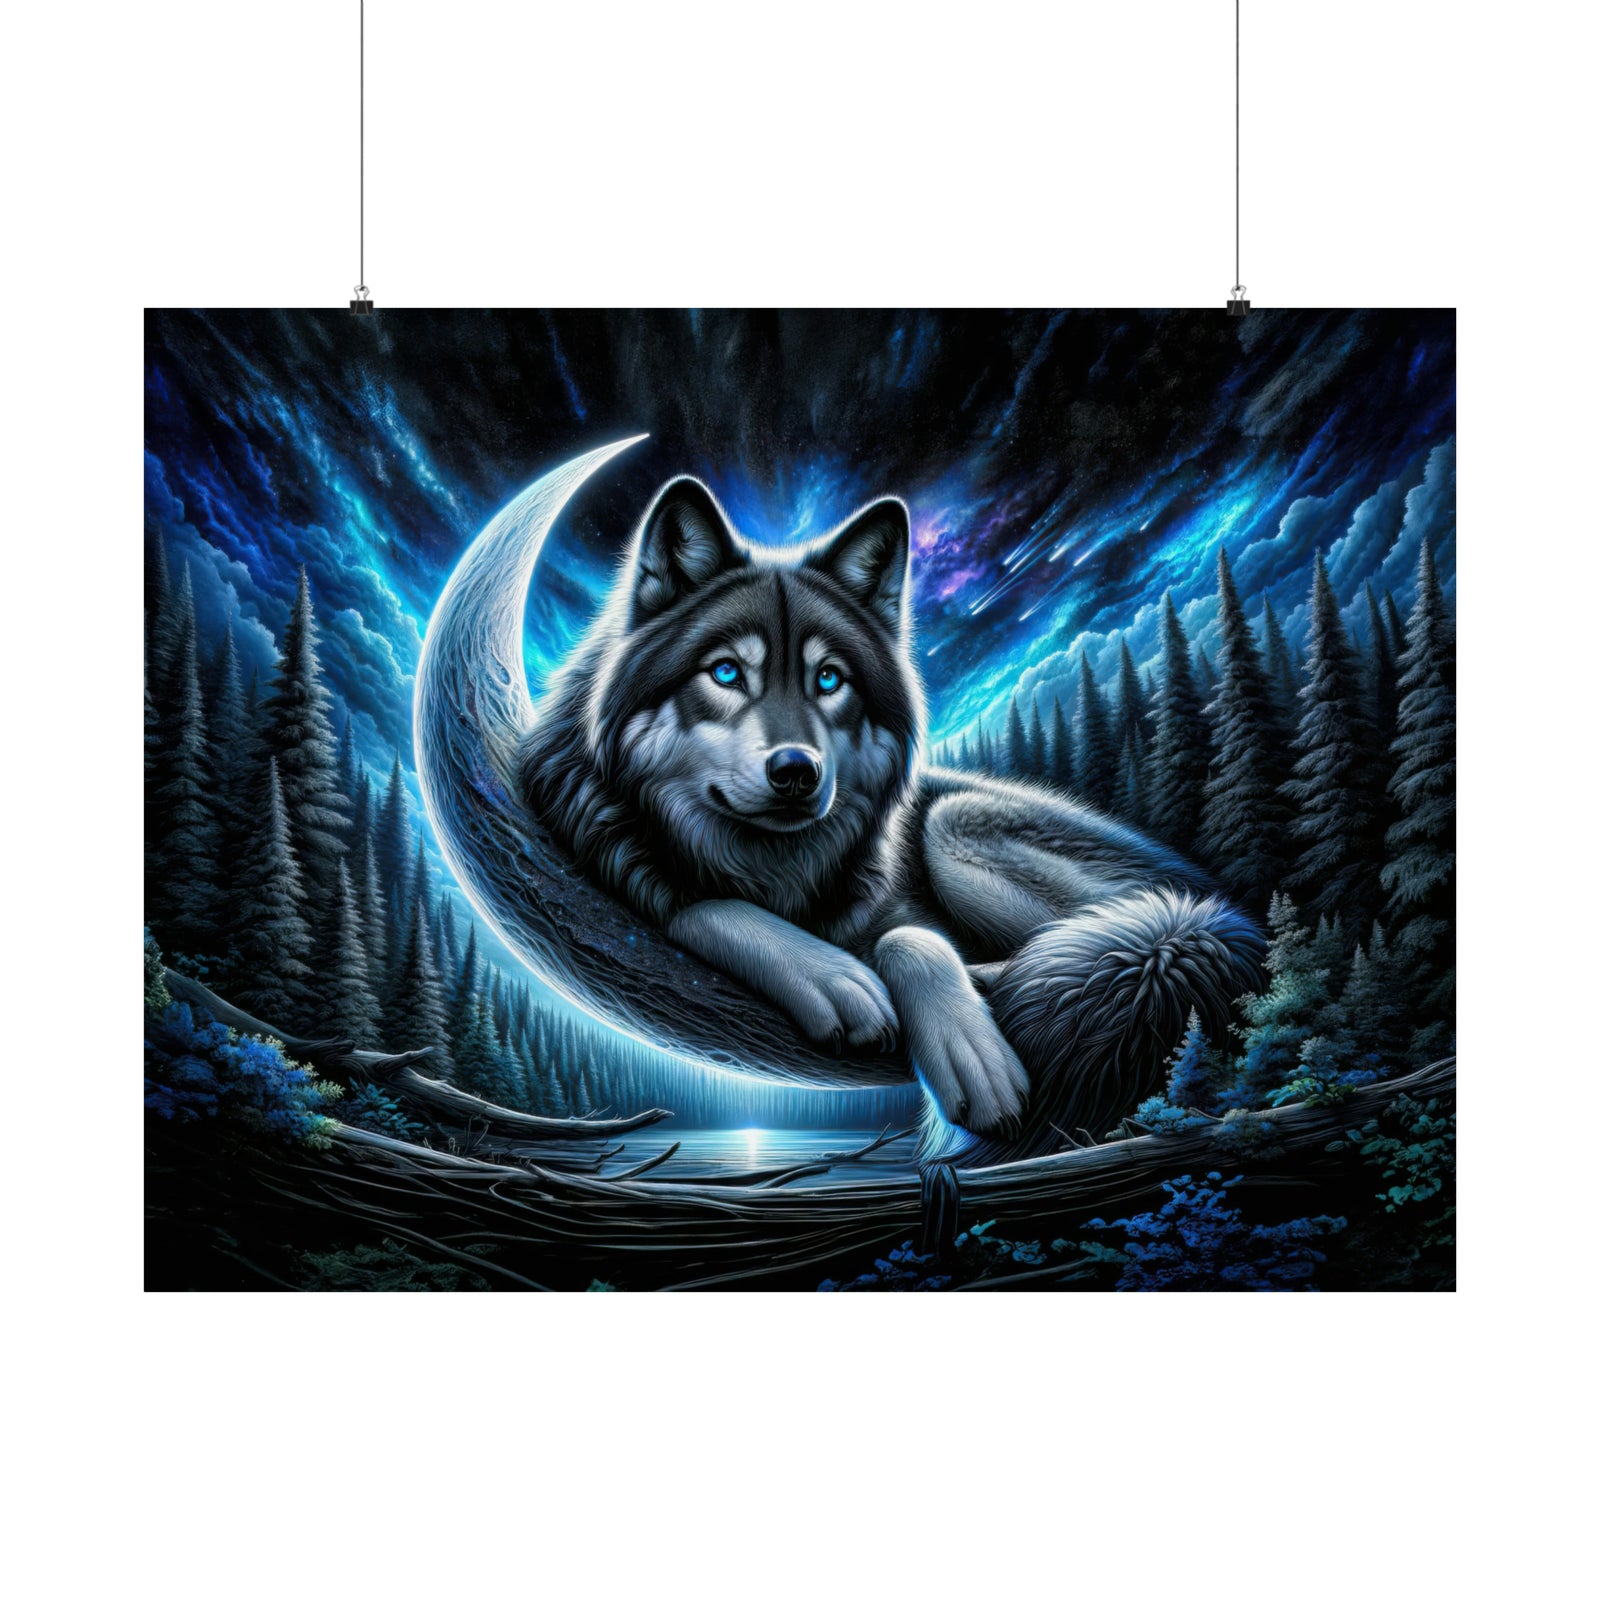 The Wolf's Cosmic Watch Poster